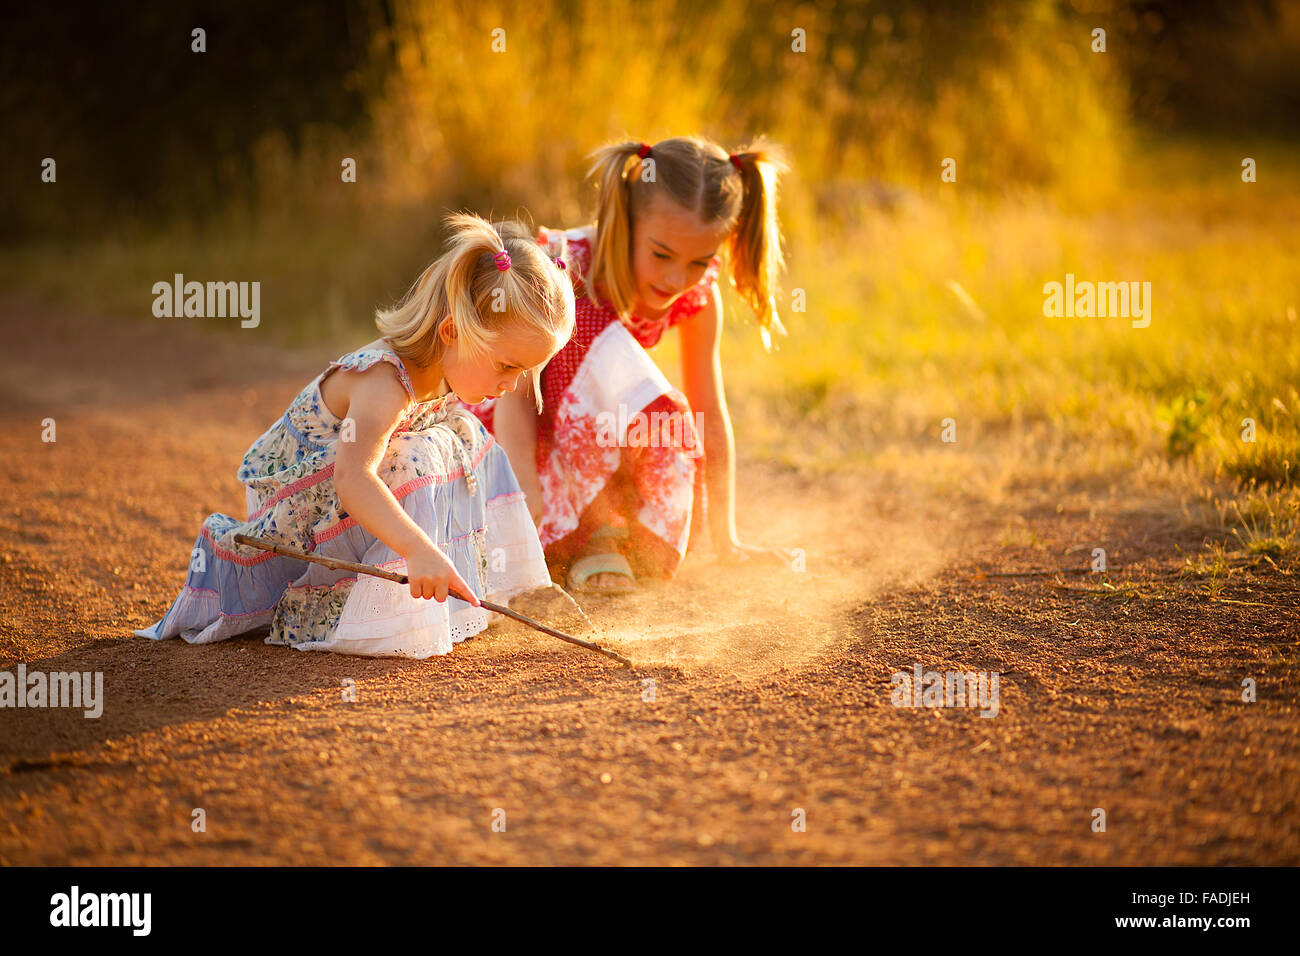 Two sisters playing in the dirt Stock Photo